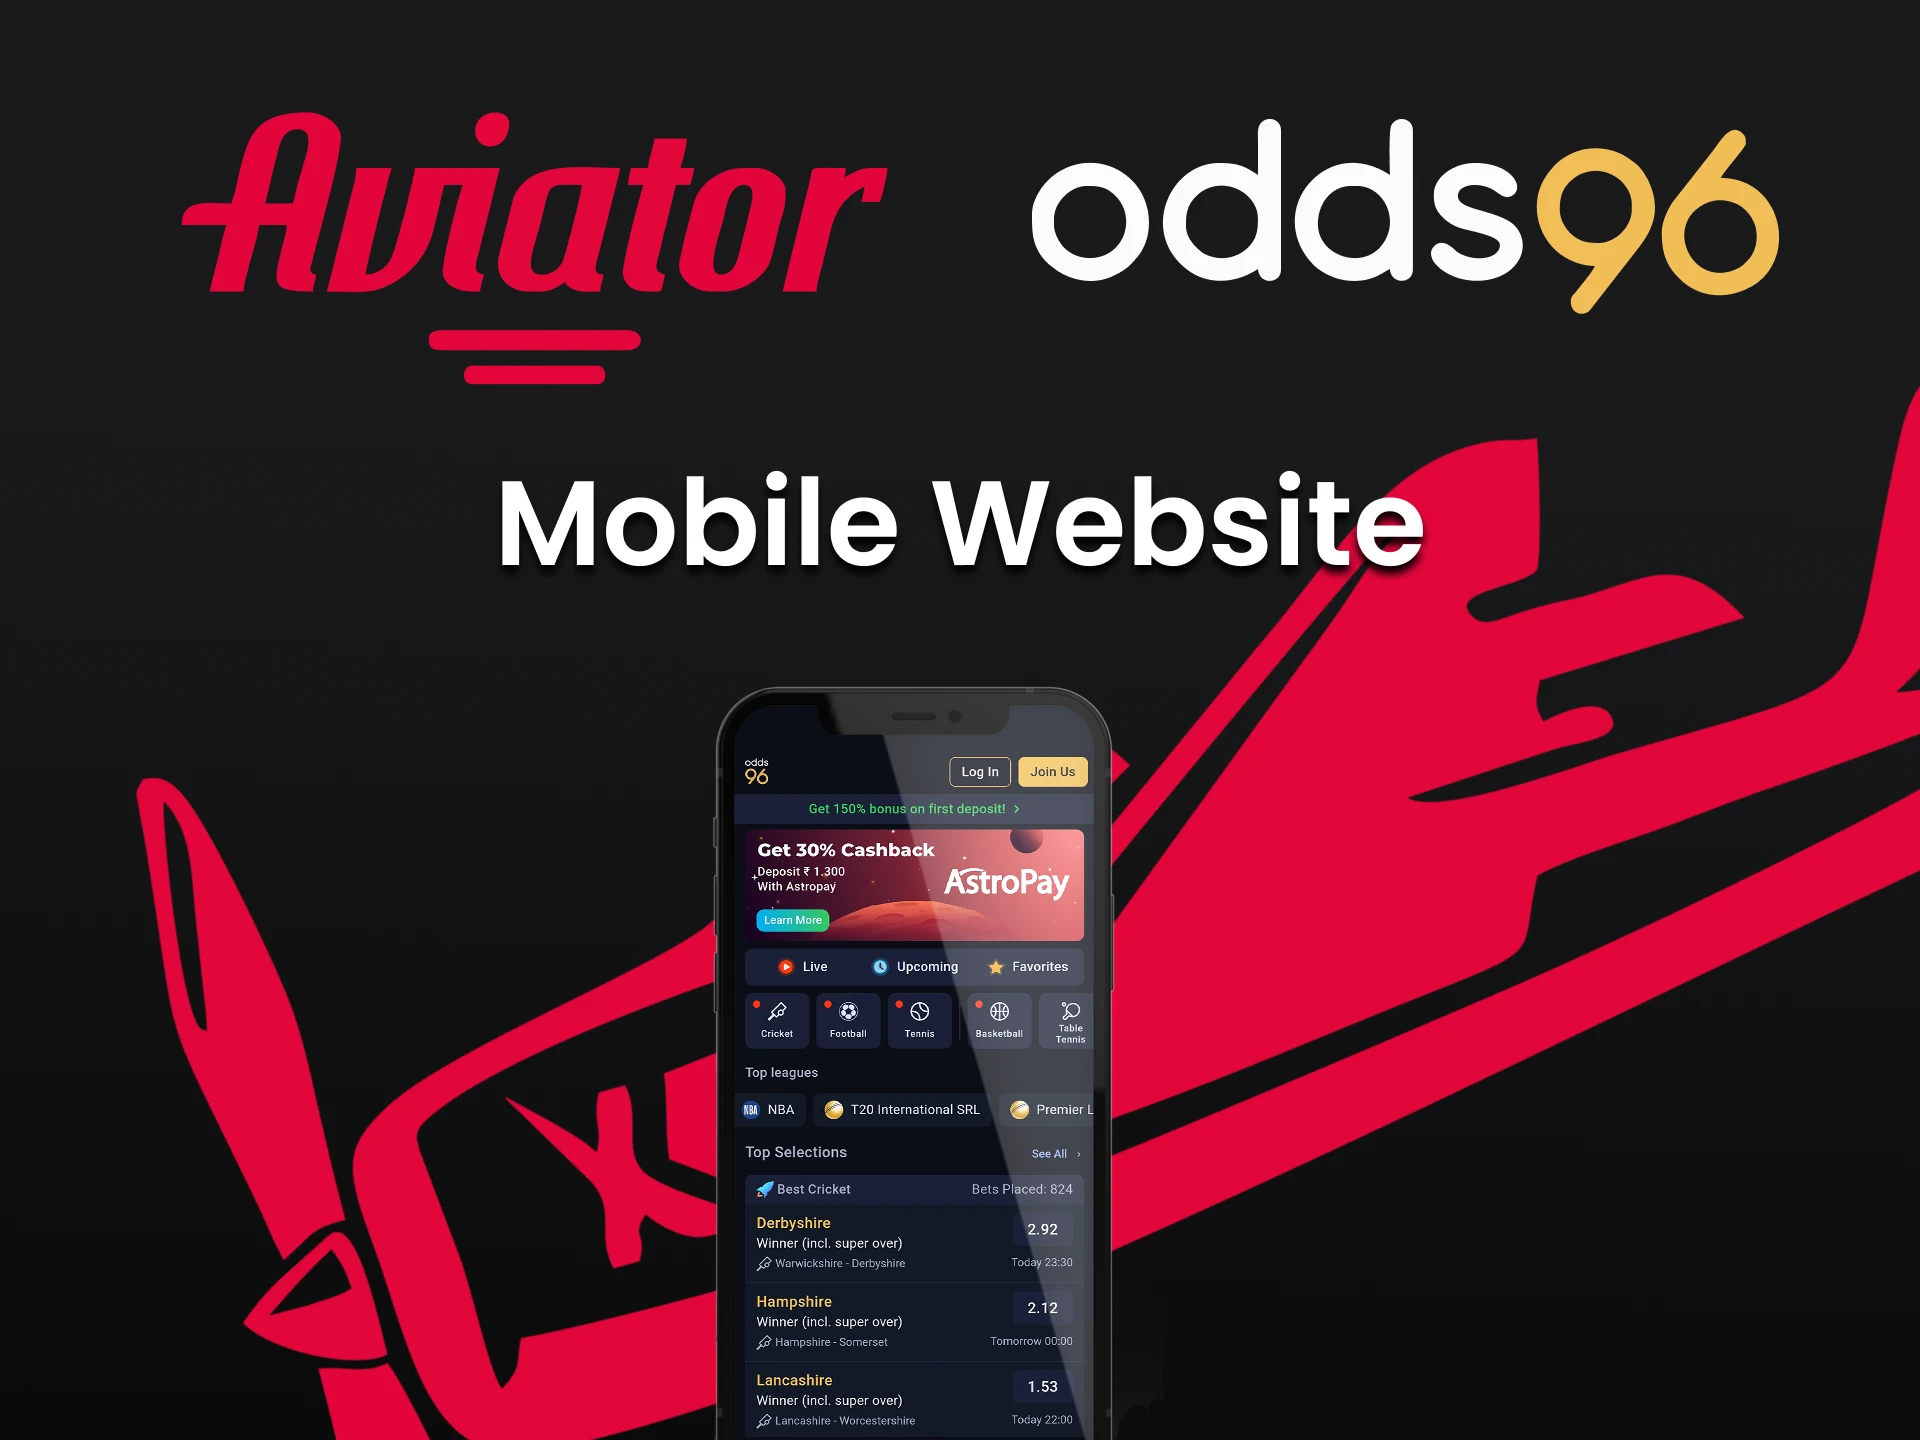 Visit the Odds96 website on your phone.